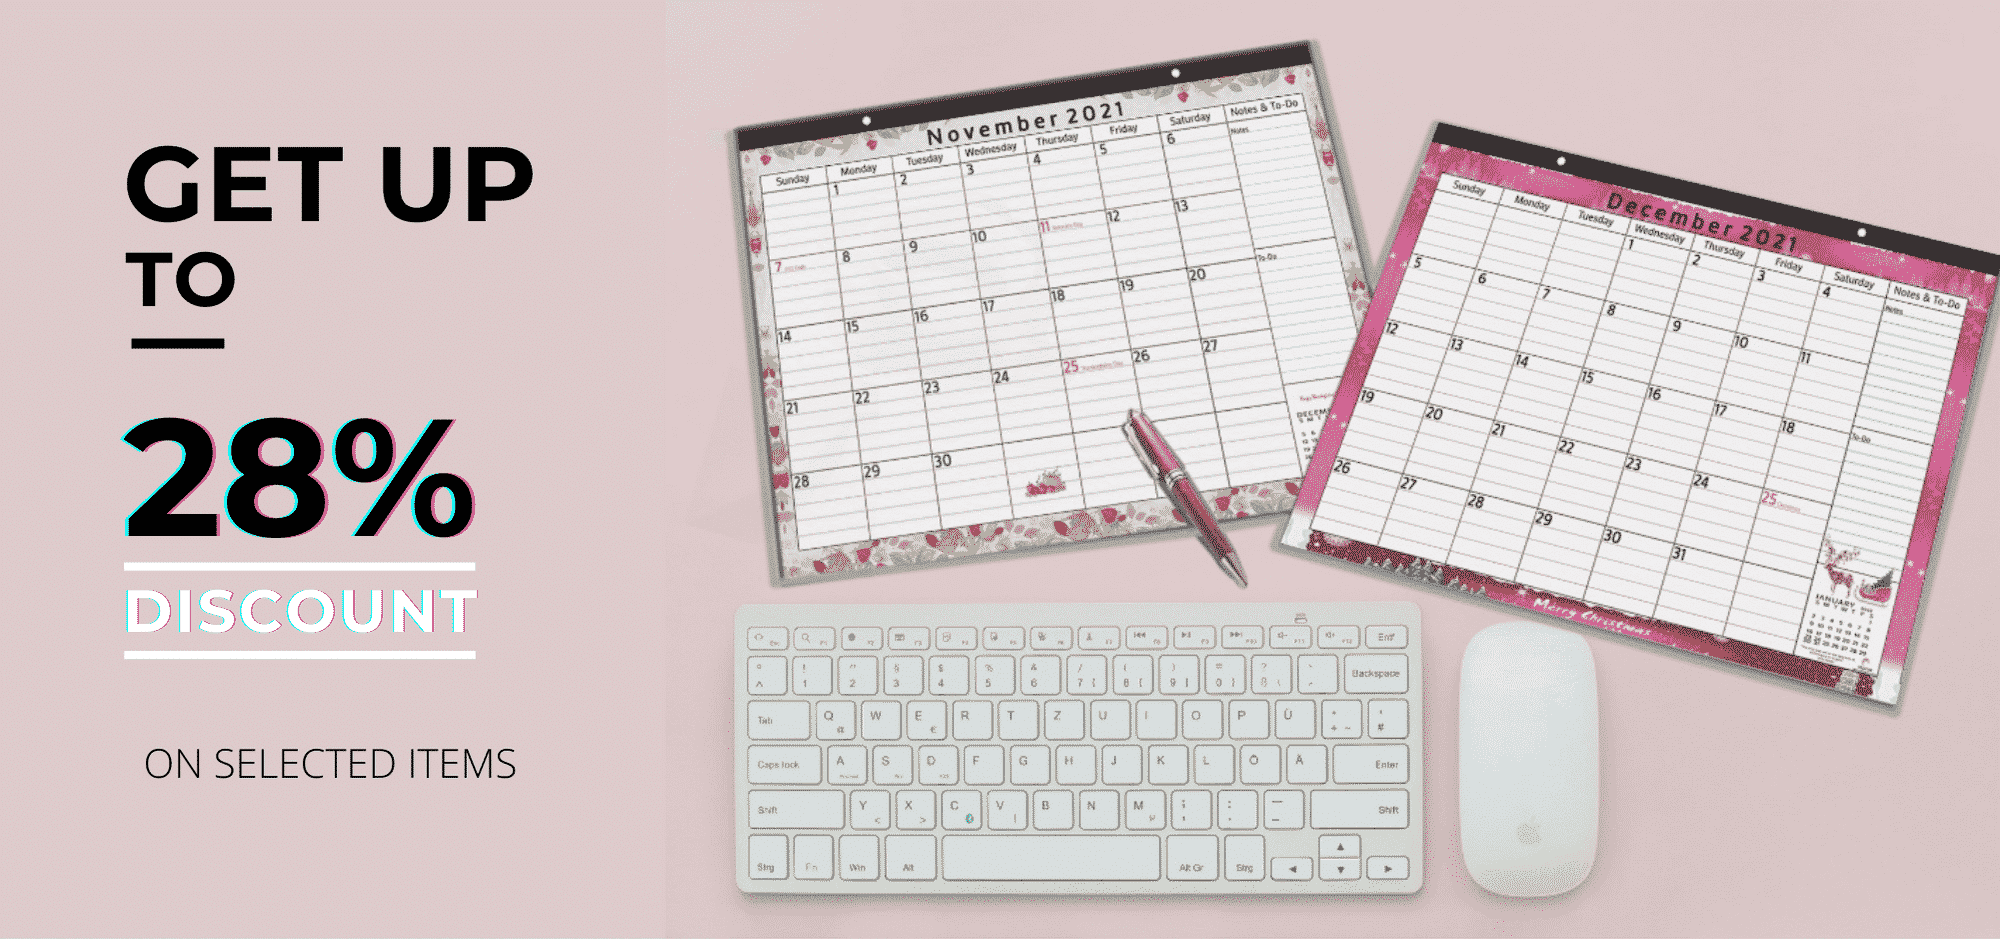 GET 28% DISCOUNT ON OUR CALENDARS AND PLANNERS